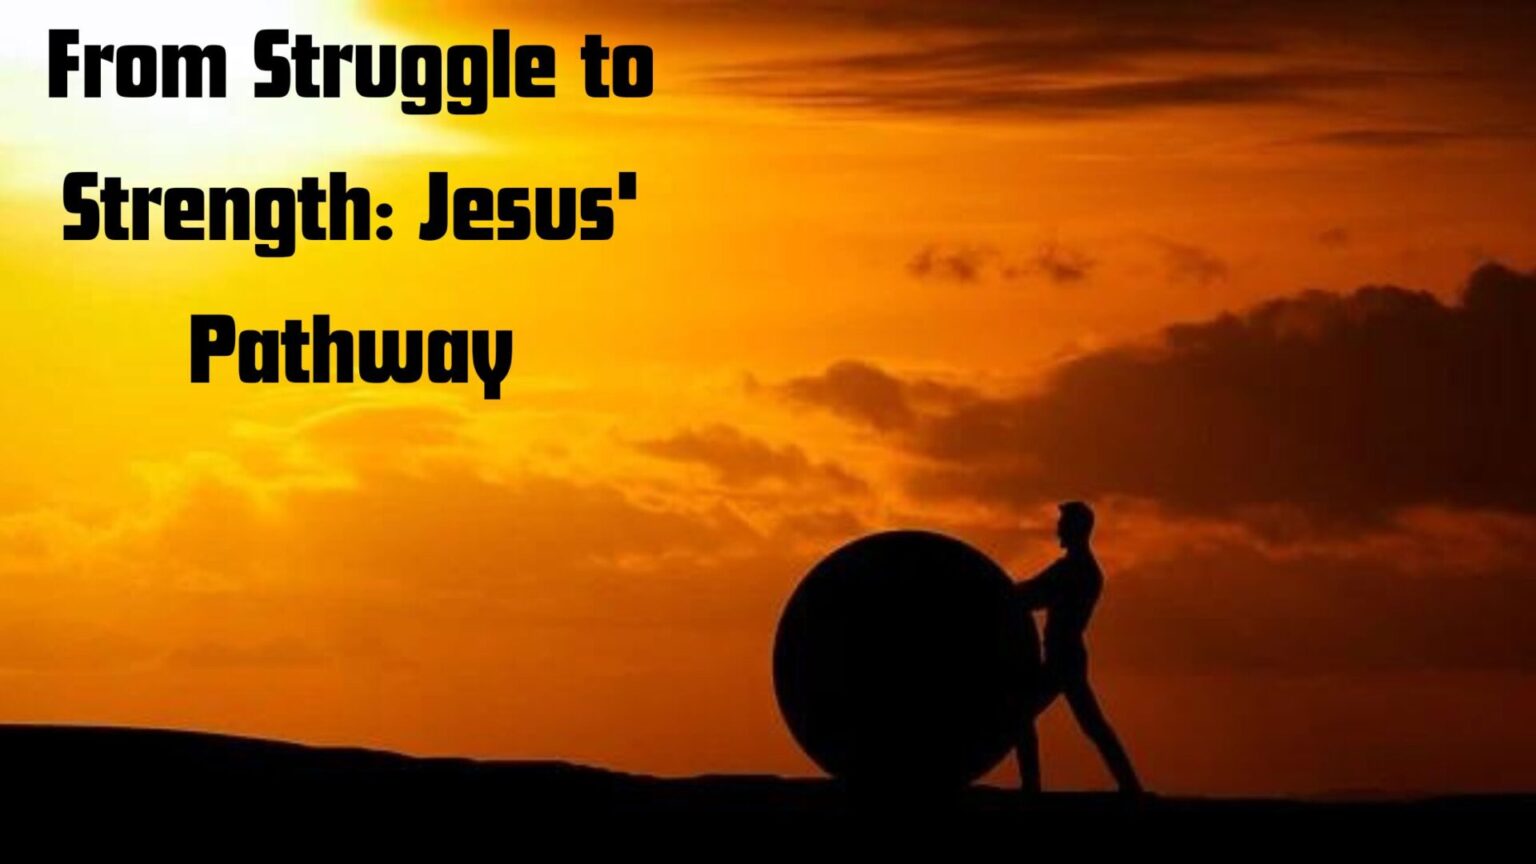 "From Struggle to Strength: Navigating Life's Challenges with Jesus' Pathway"